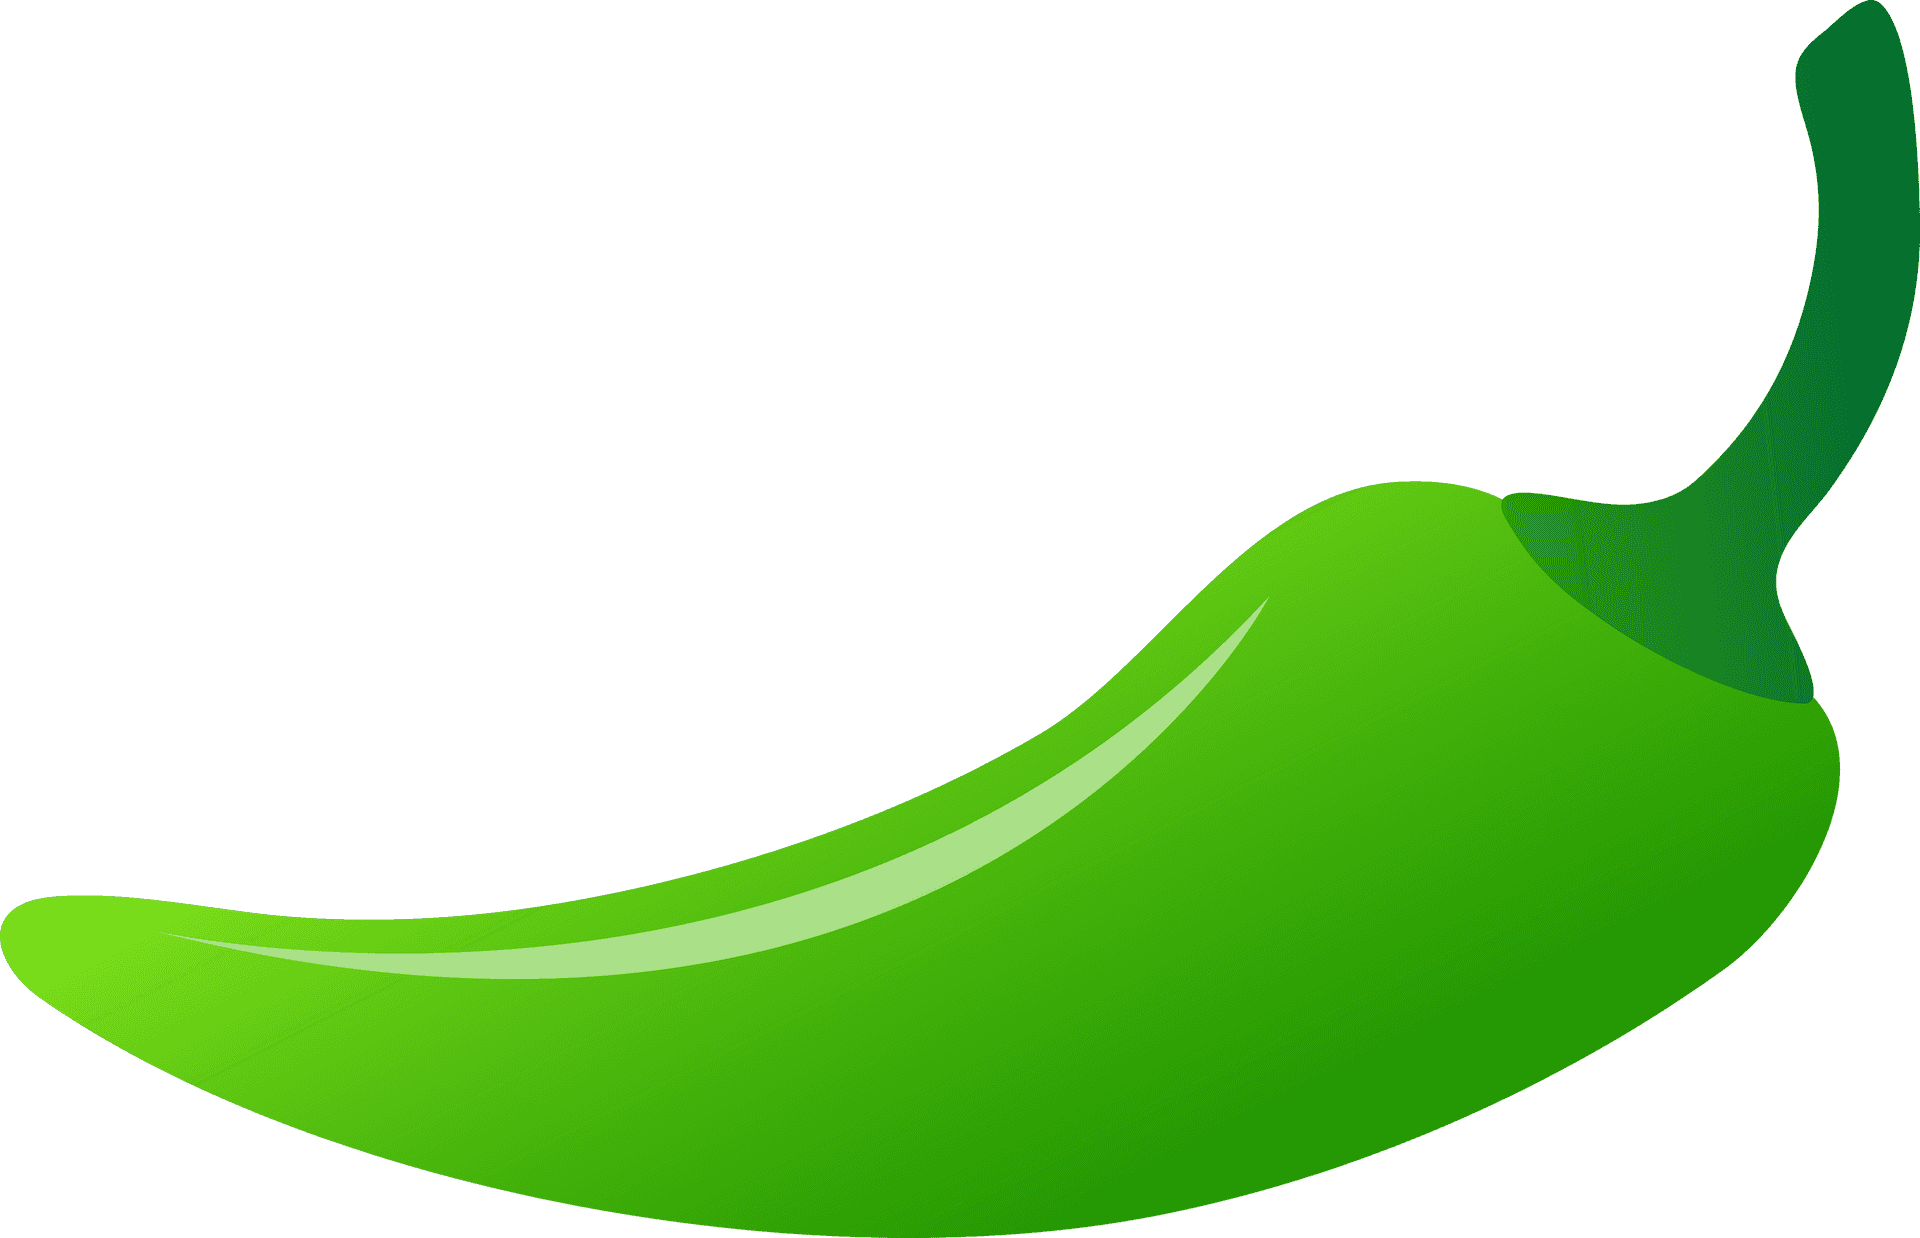 Green Chili Pepper Graphic PNG